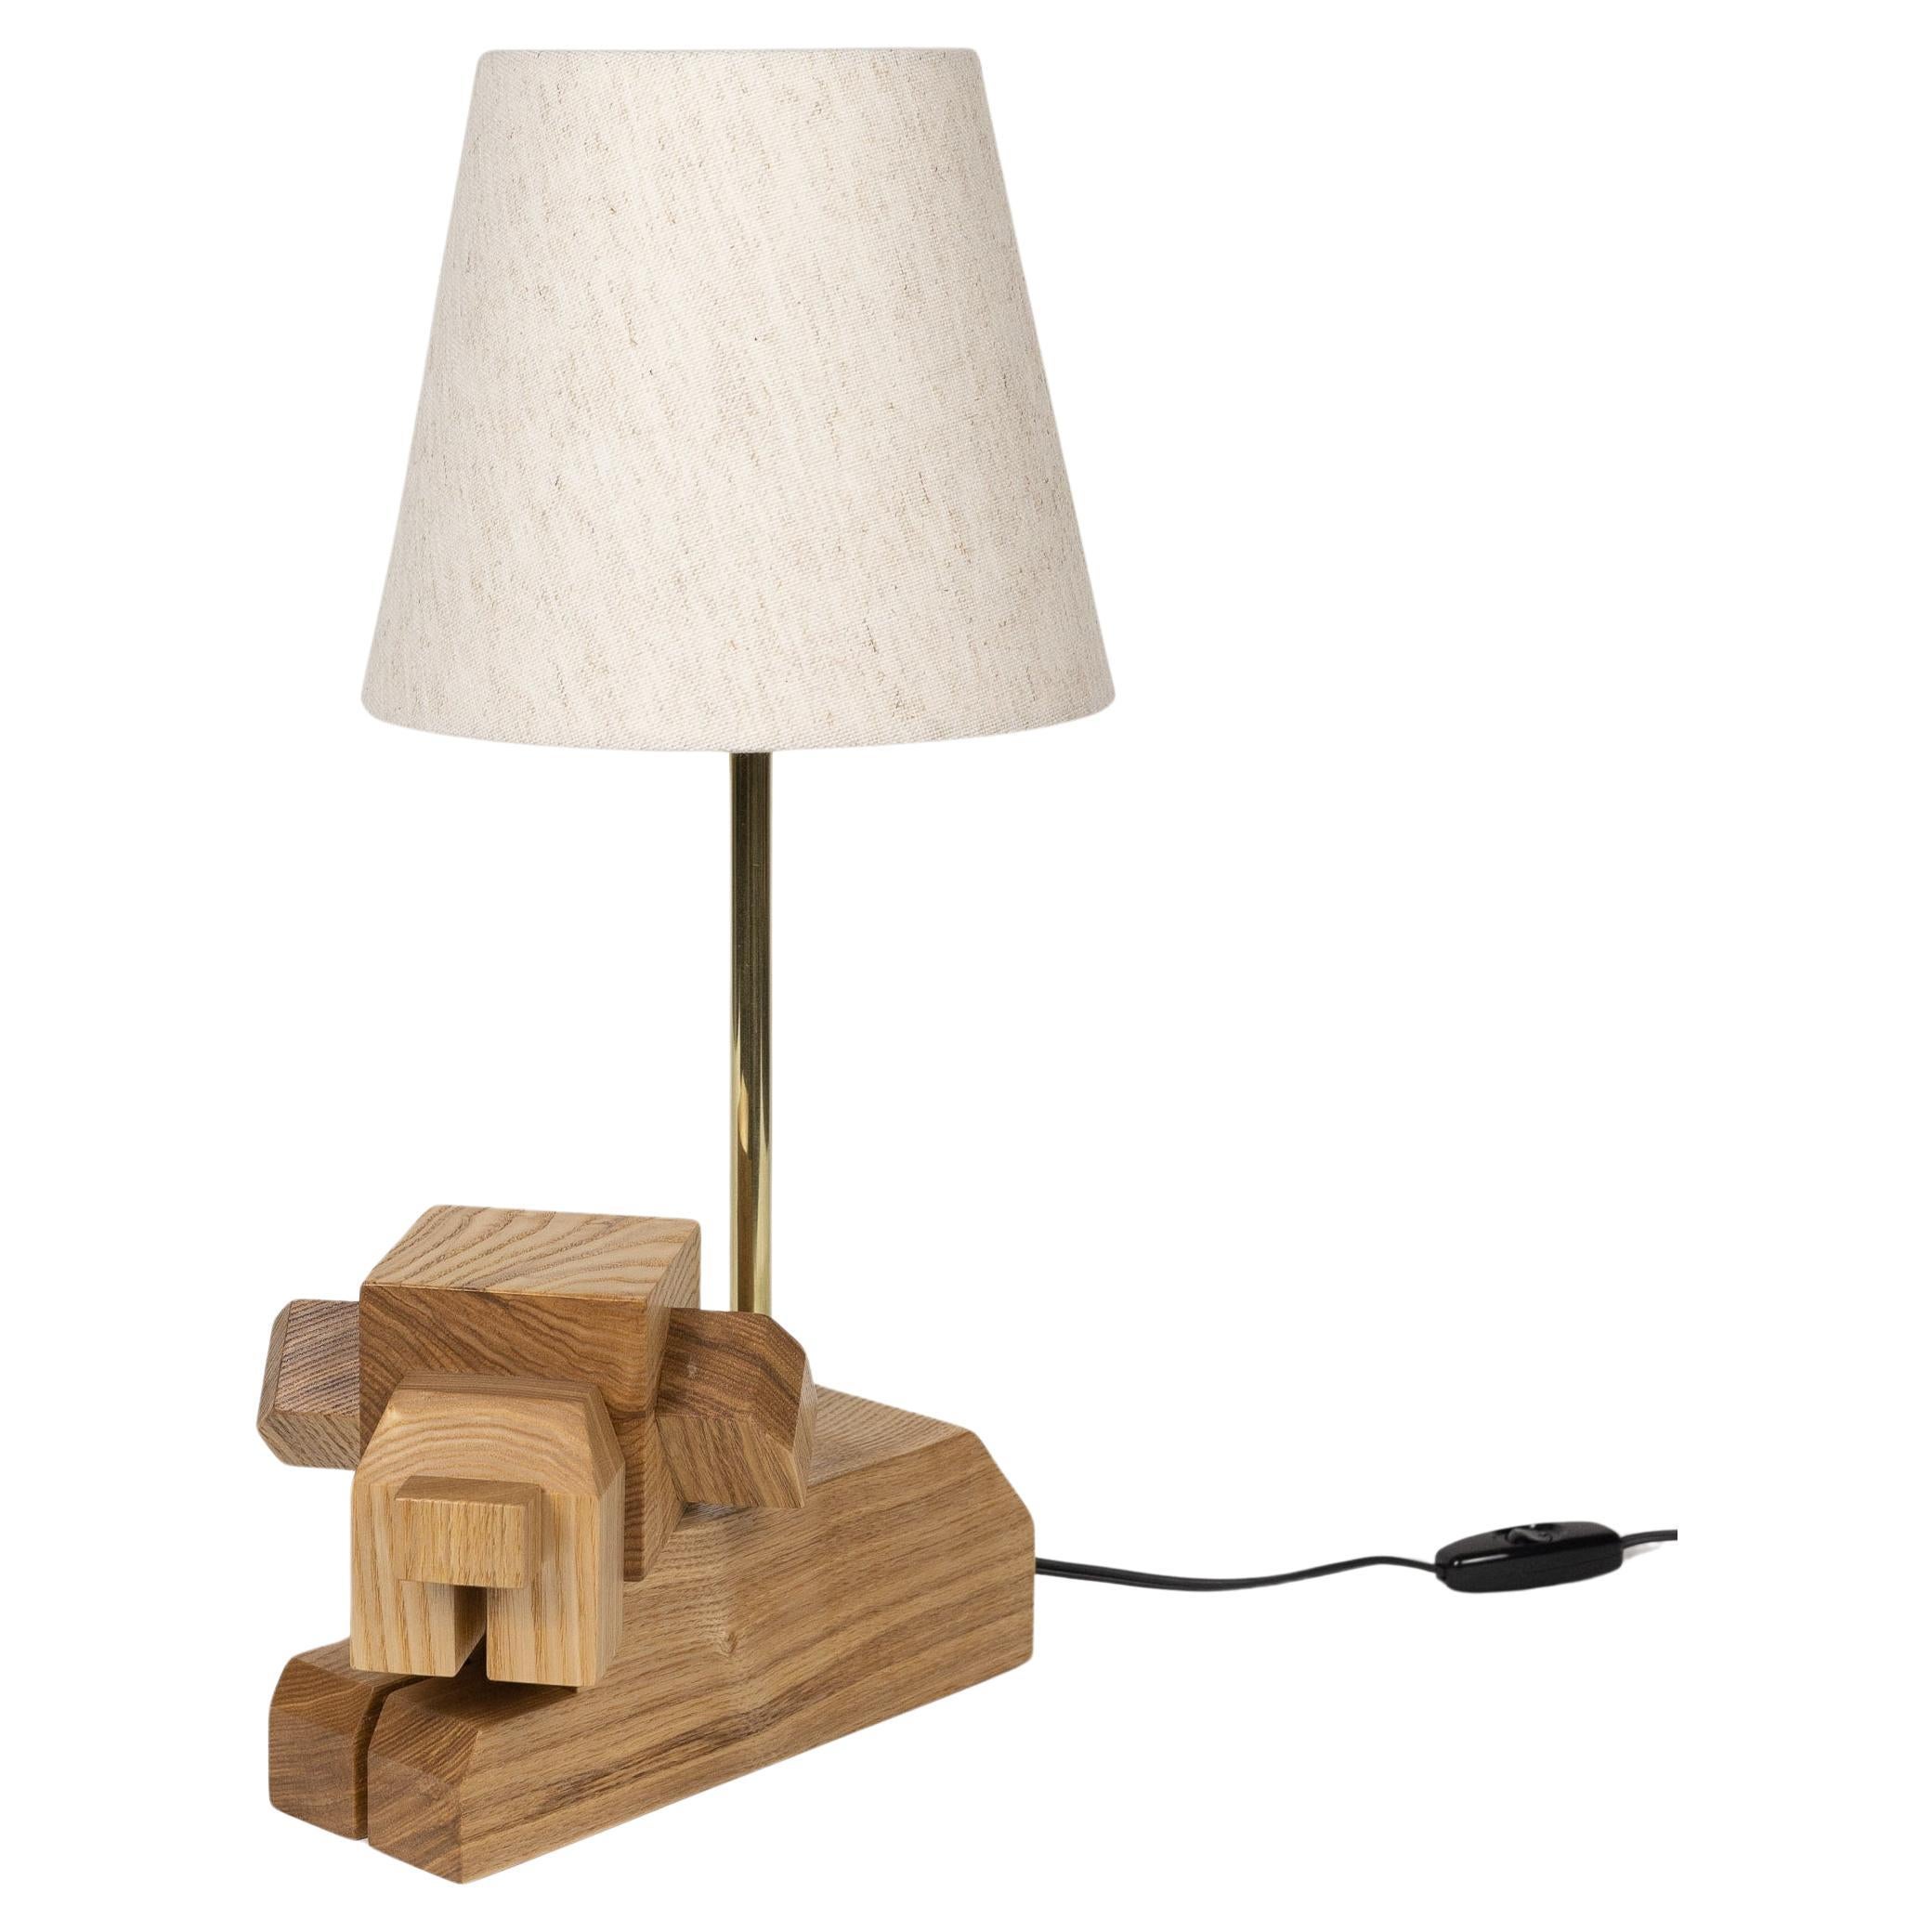 In-stock, Doggy Wooden Table Lamp by WANWANWONDERLAND, hardwood, fabric shade  For Sale